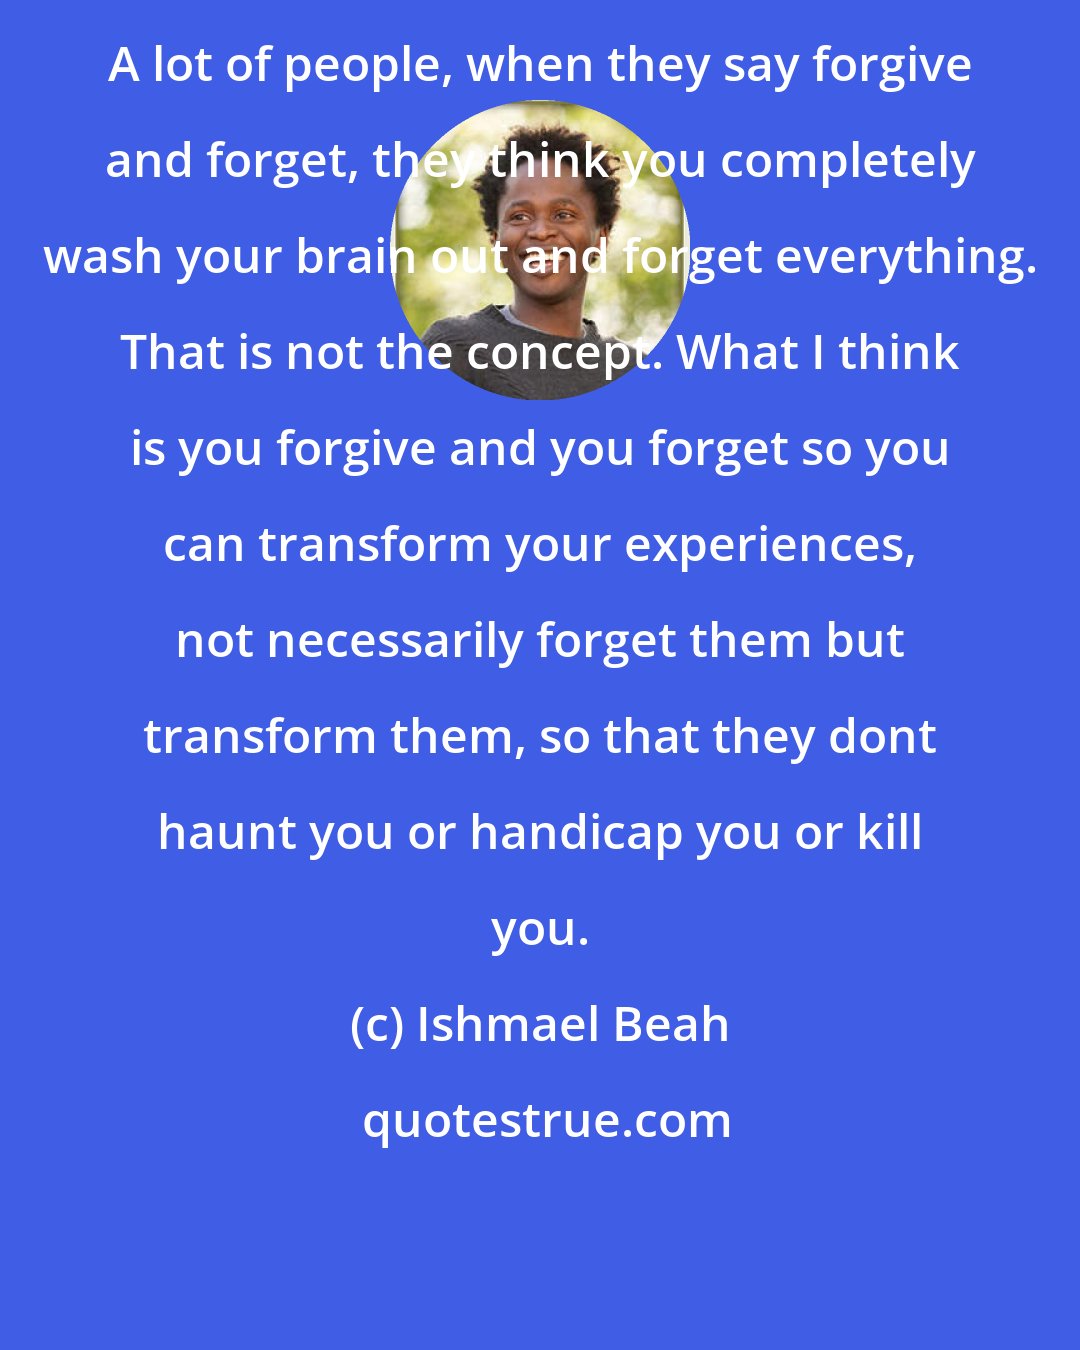 Ishmael Beah: A lot of people, when they say forgive and forget, they think you completely wash your brain out and forget everything. That is not the concept. What I think is you forgive and you forget so you can transform your experiences, not necessarily forget them but transform them, so that they dont haunt you or handicap you or kill you.